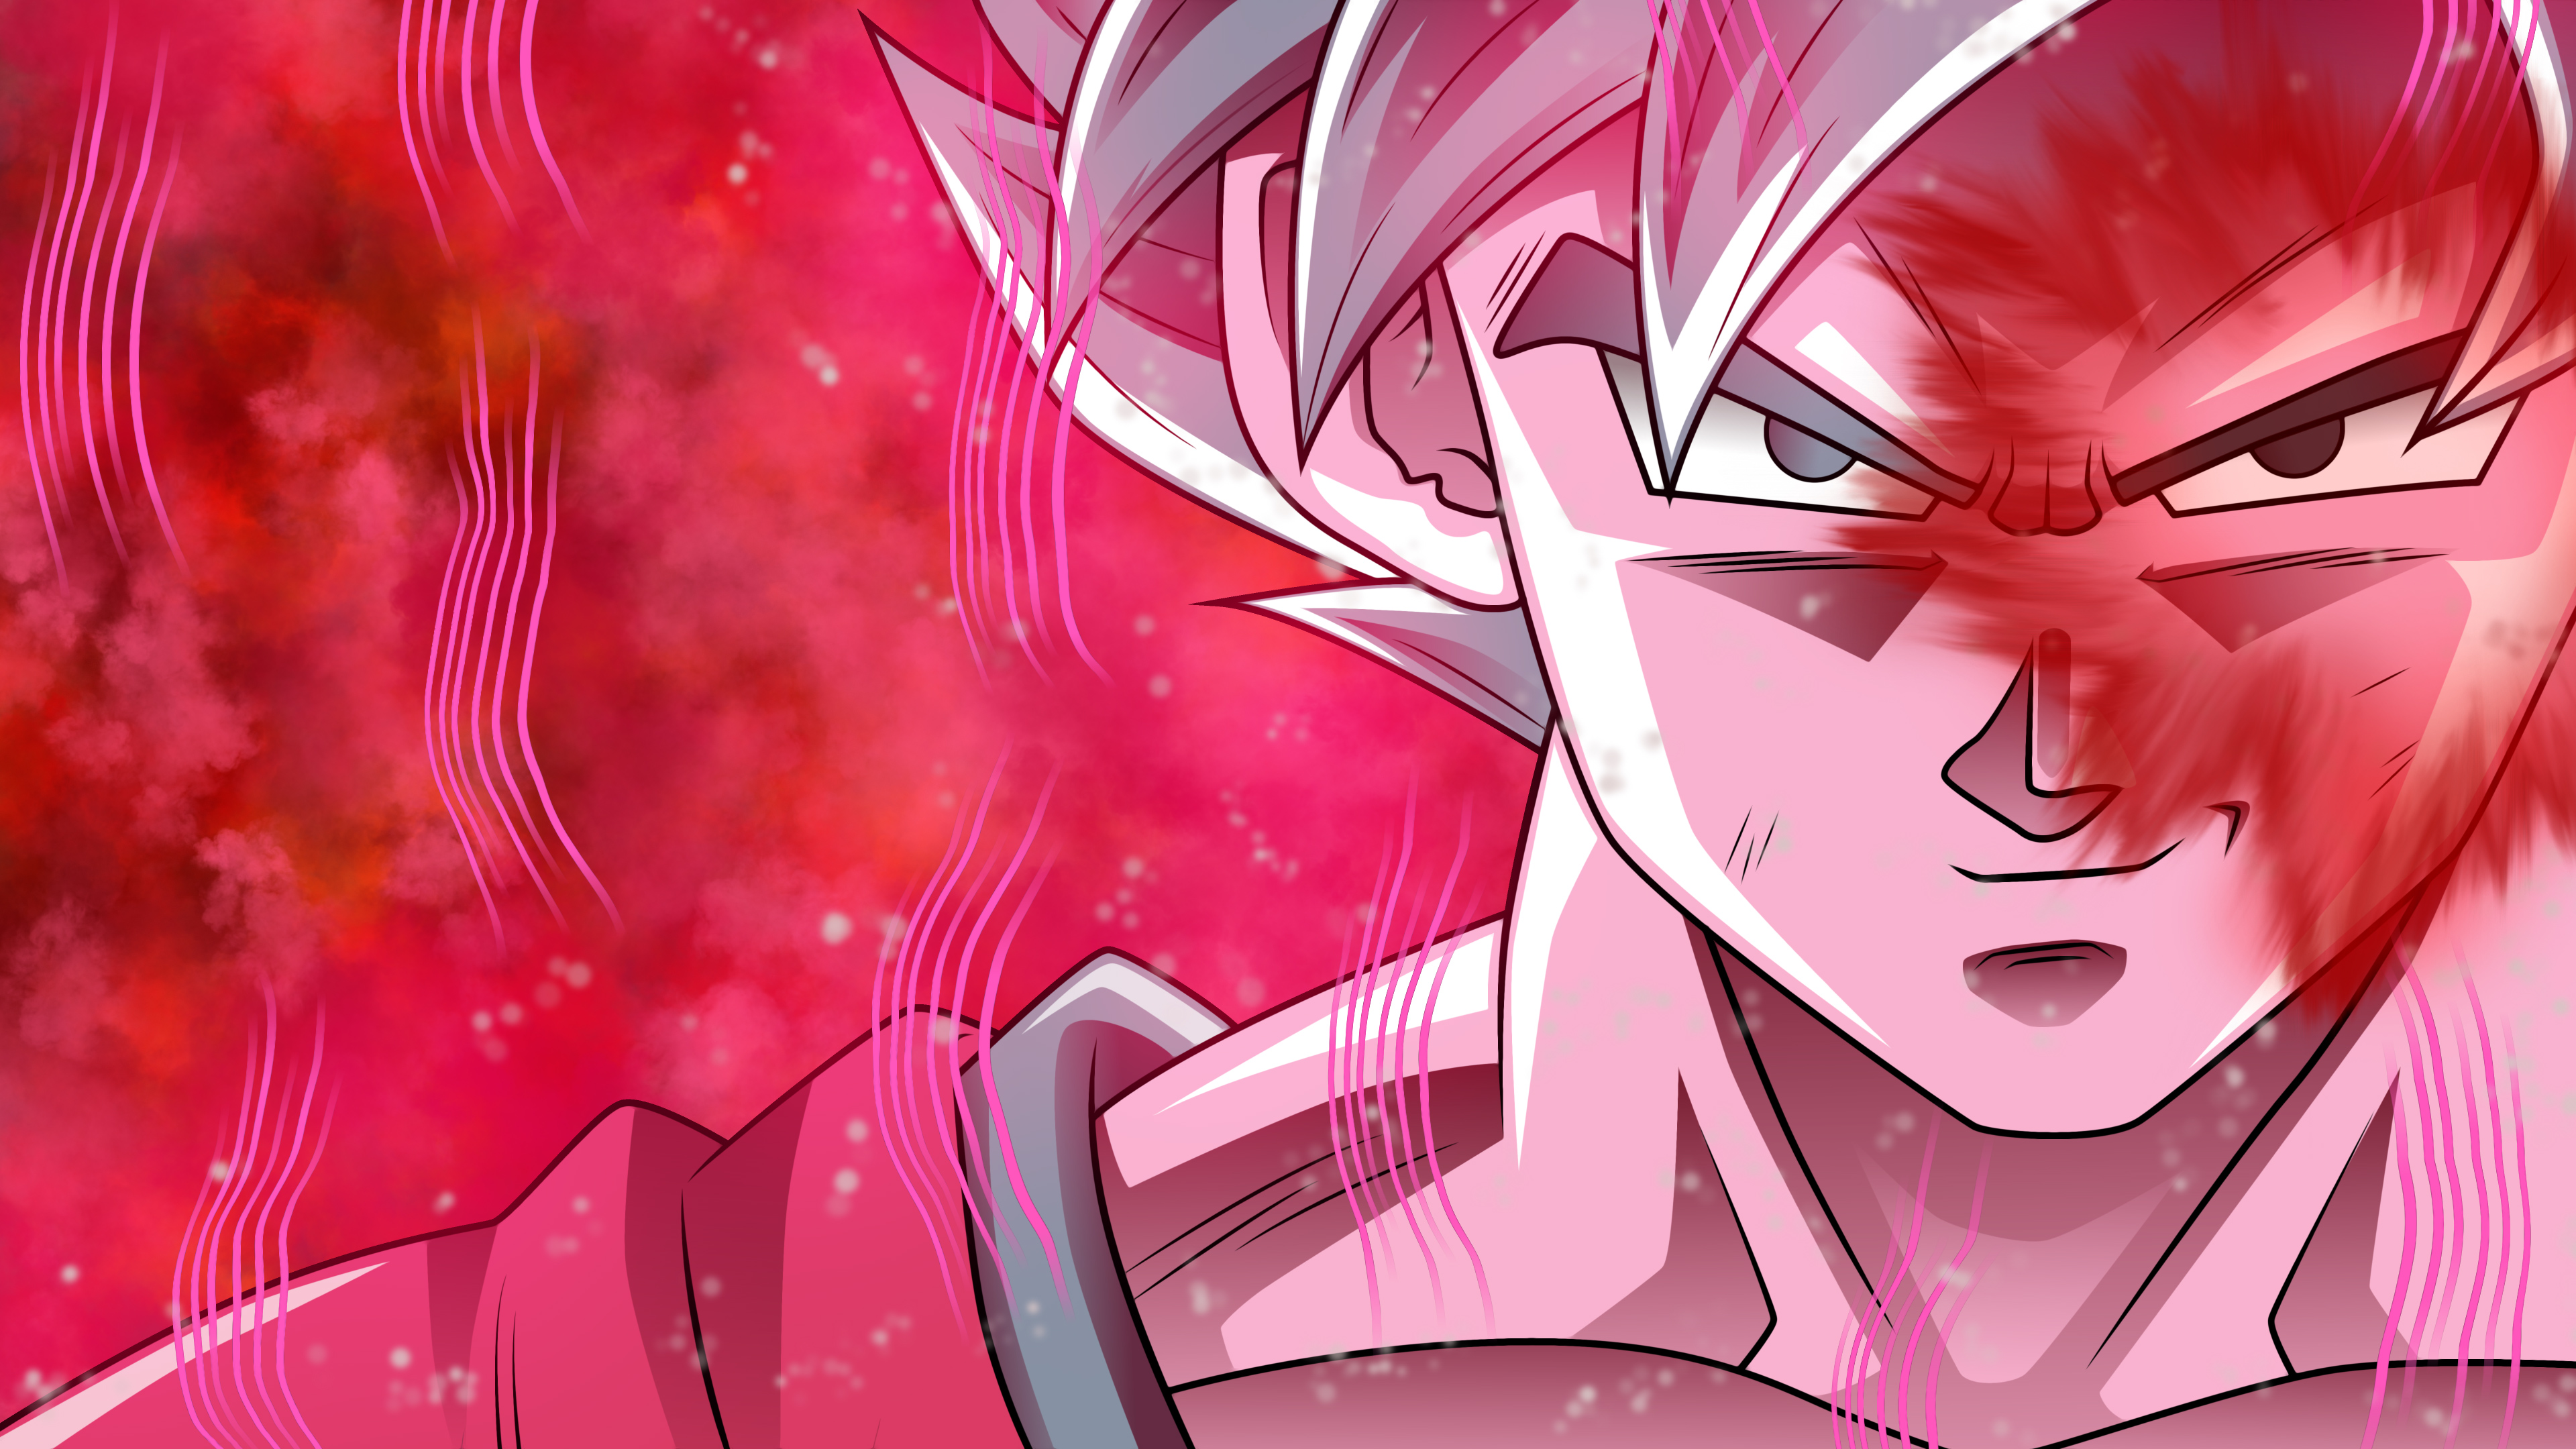 X goku fan art k p resolution hd k wallpapers images backgrounds photos and pictures